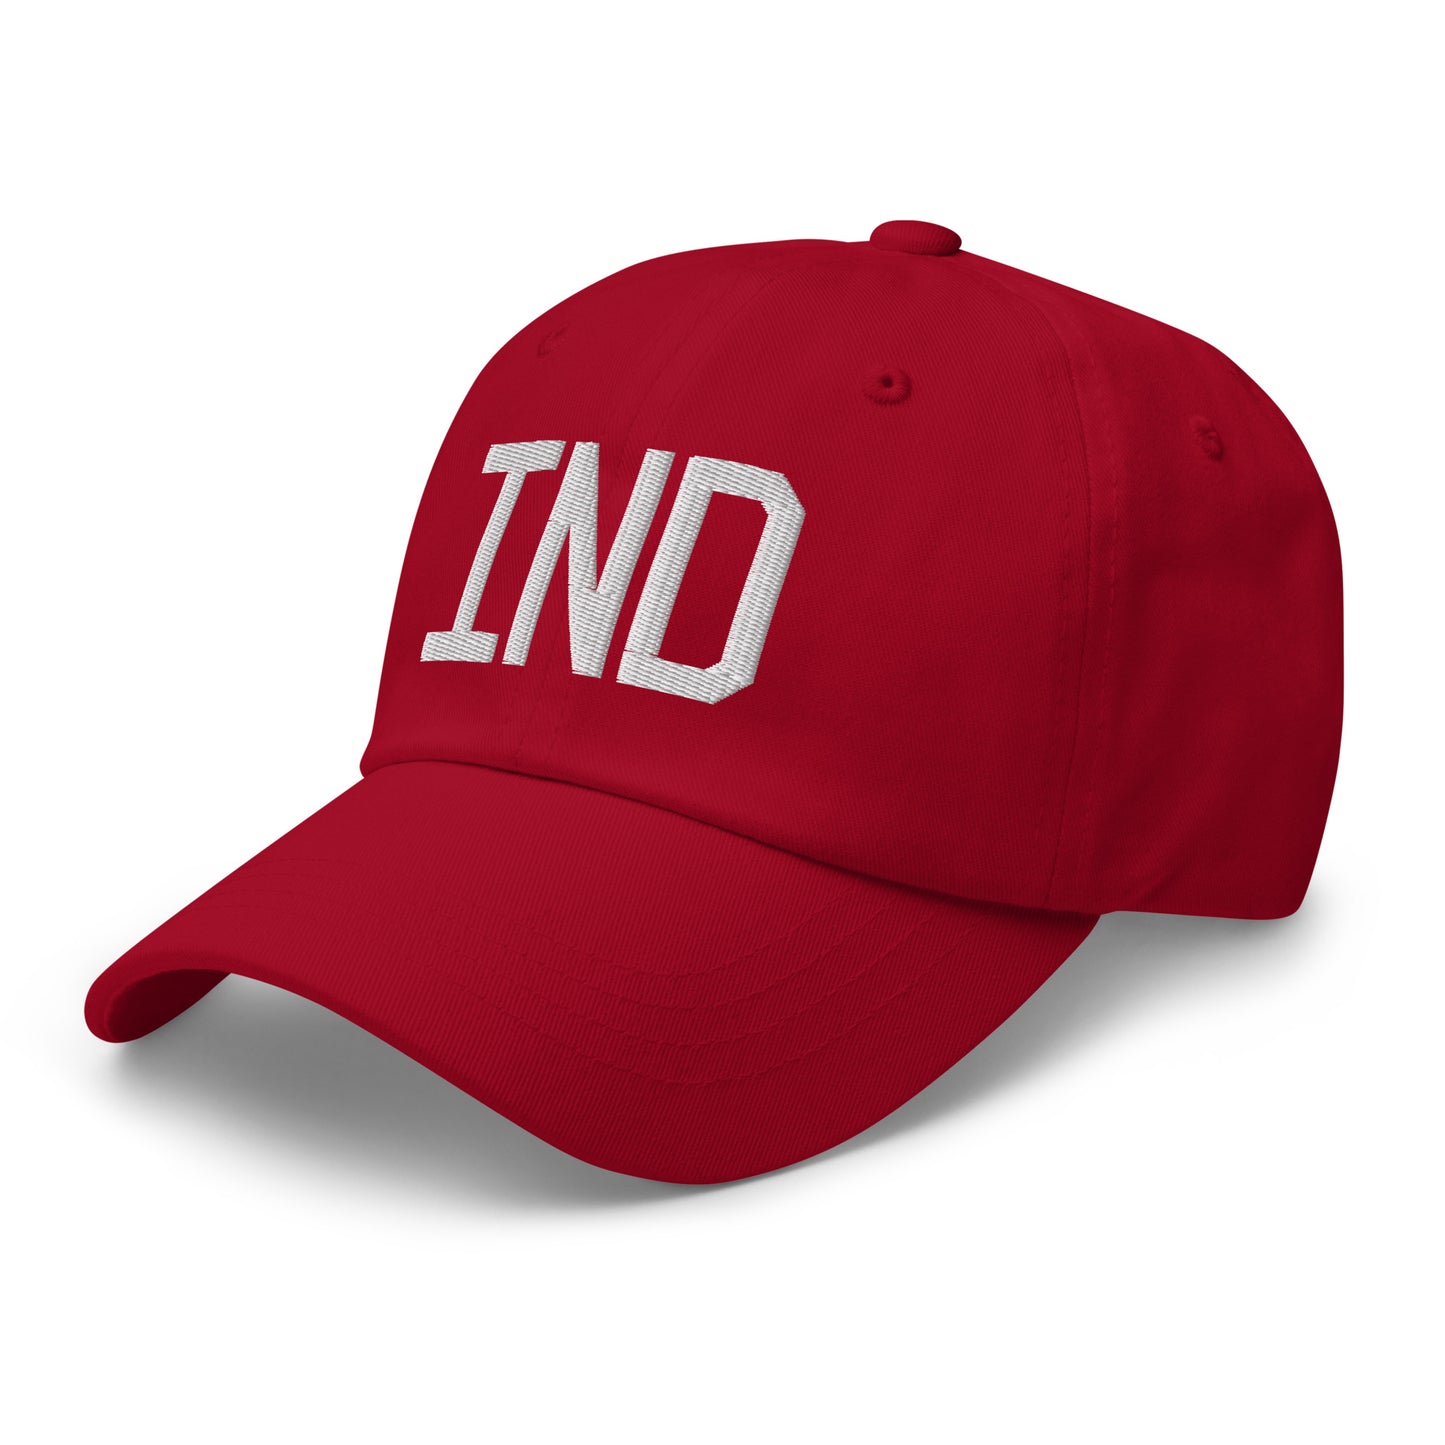 Airport Code Baseball Cap - White • IND Indianapolis • YHM Designs - Image 21